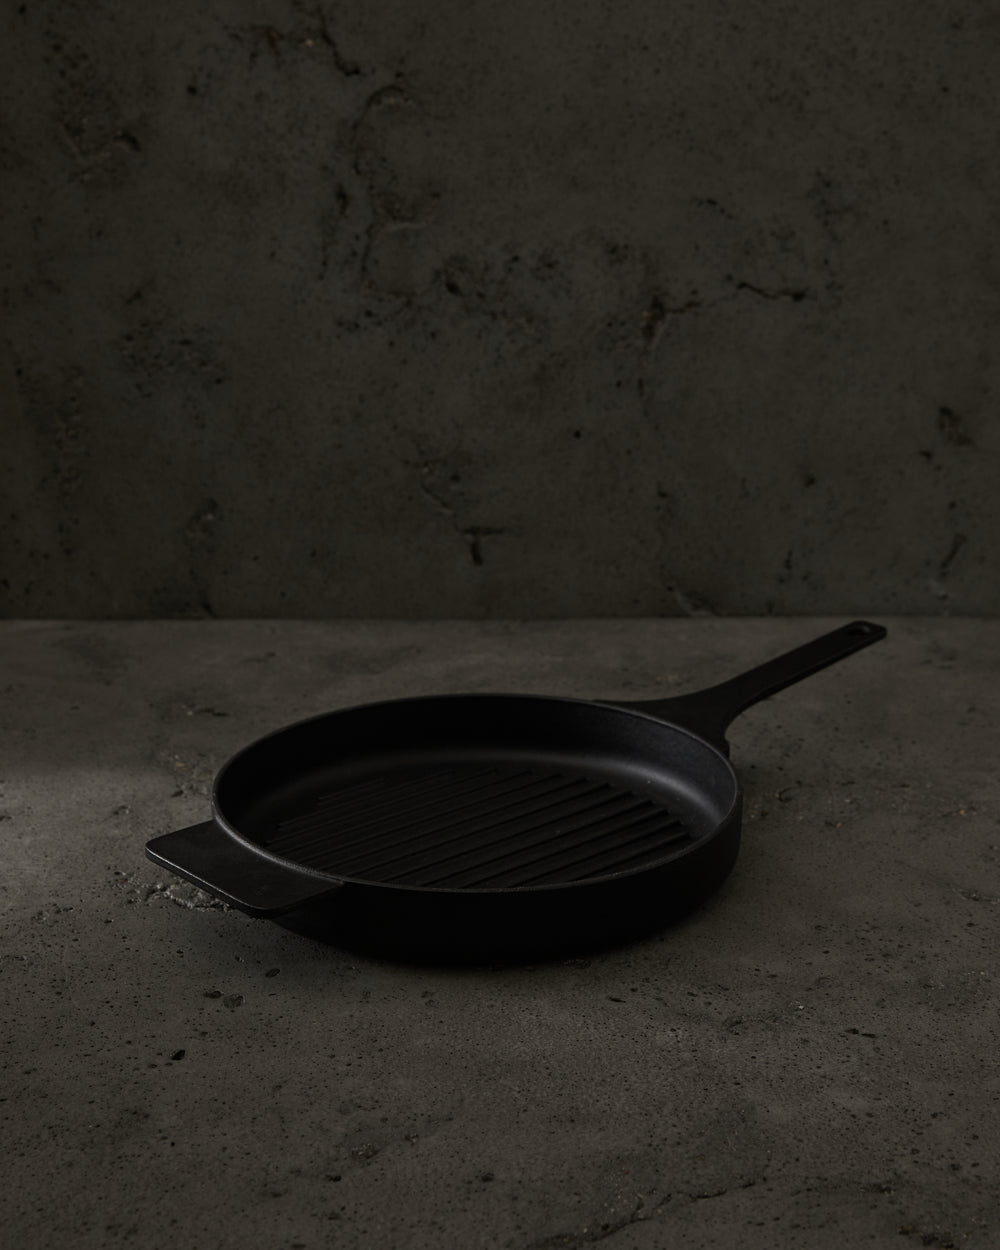 Enamelled Cast Iron Grill Pan